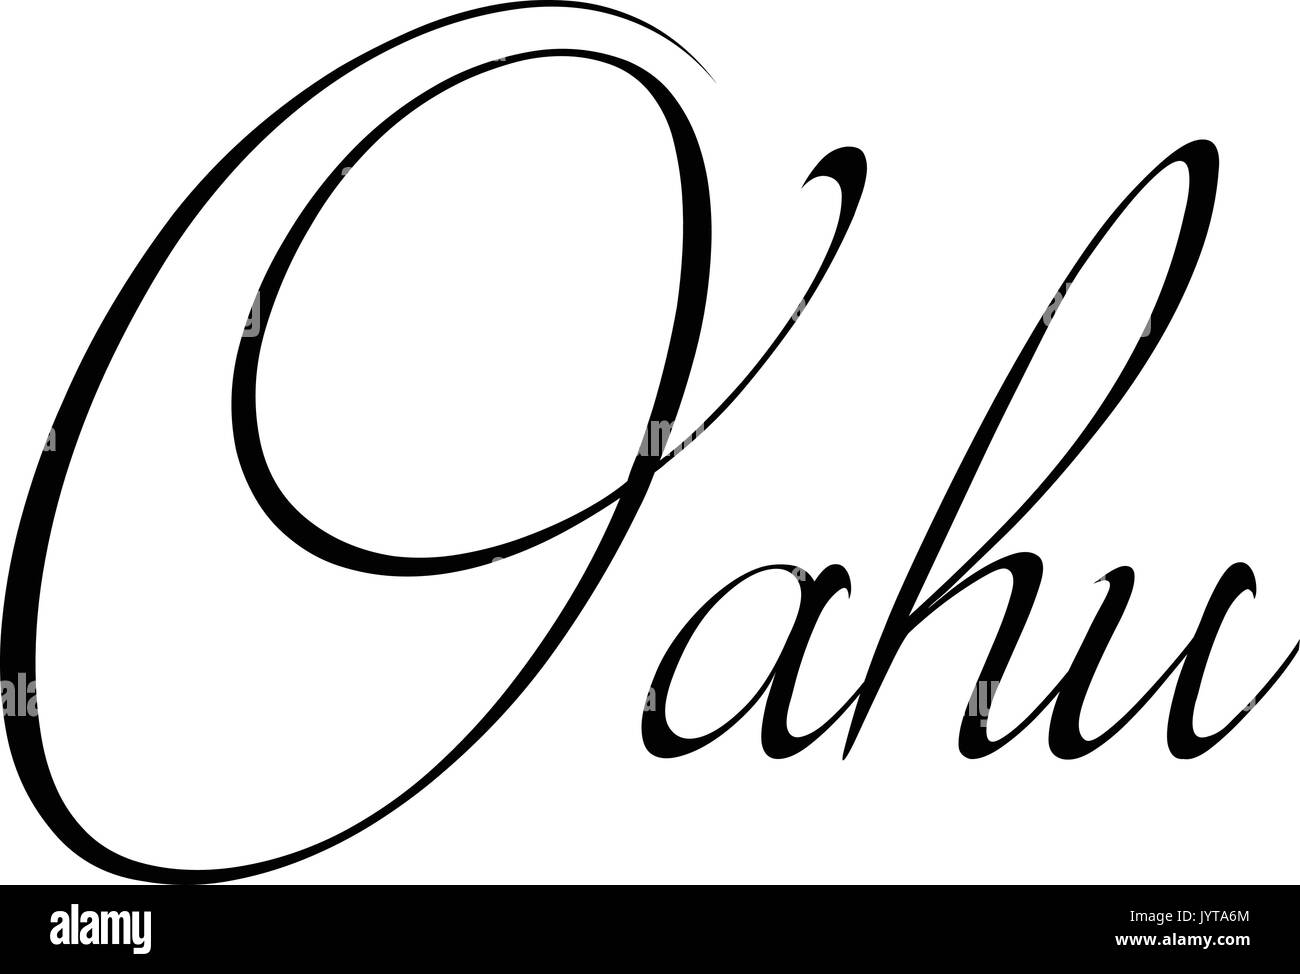 Oahu text sign illustration on white background Stock Vector